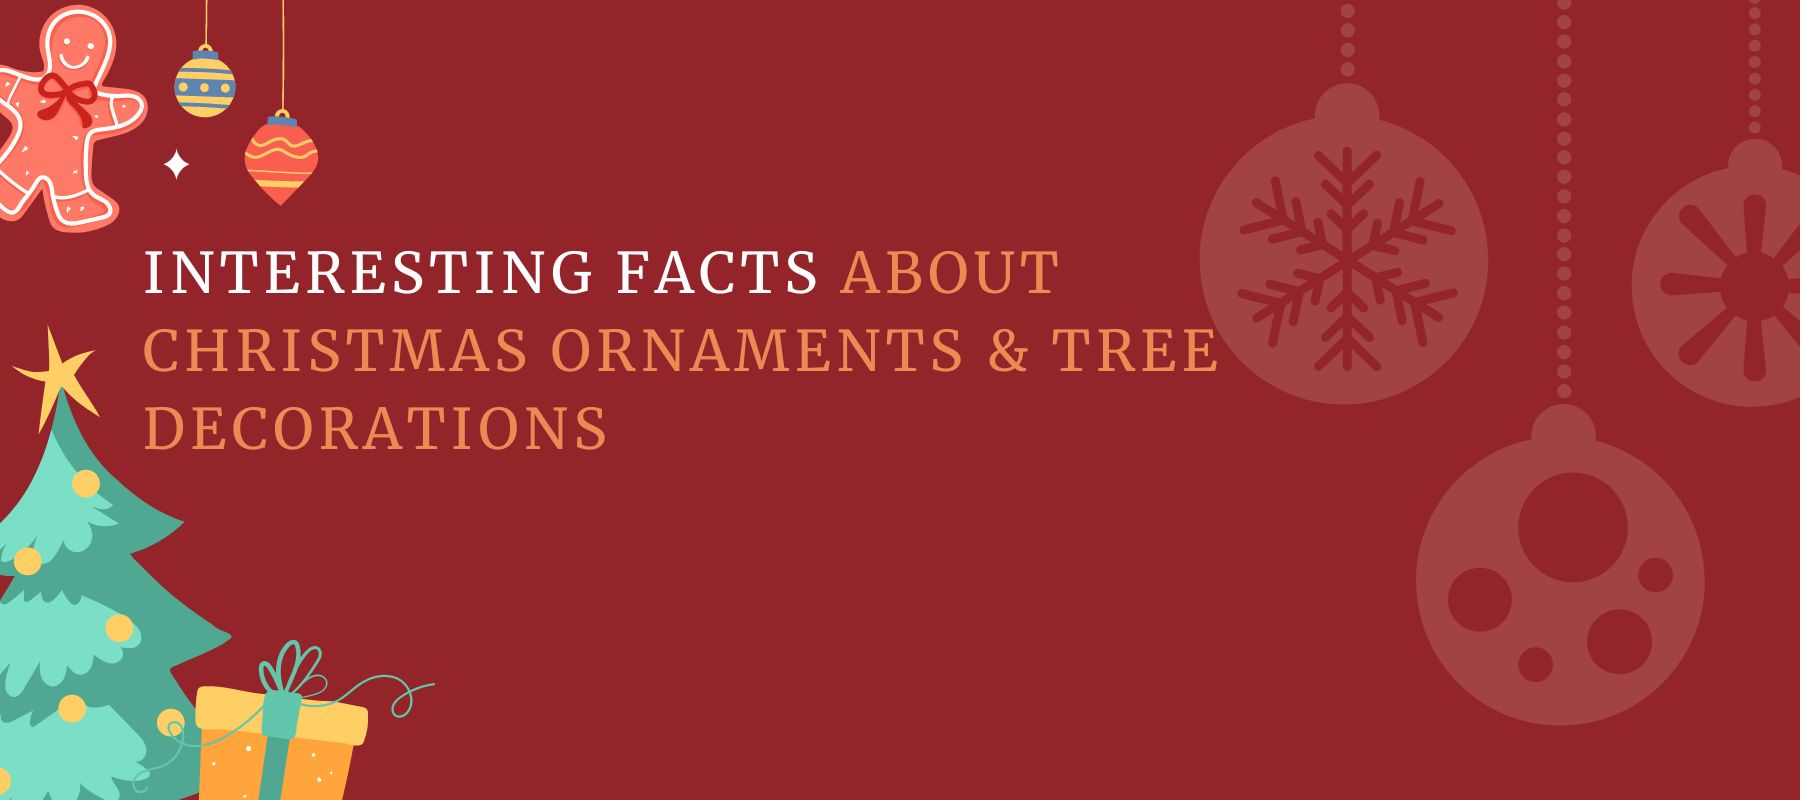 Christmas-ornaments-and-tree-decorations-facts